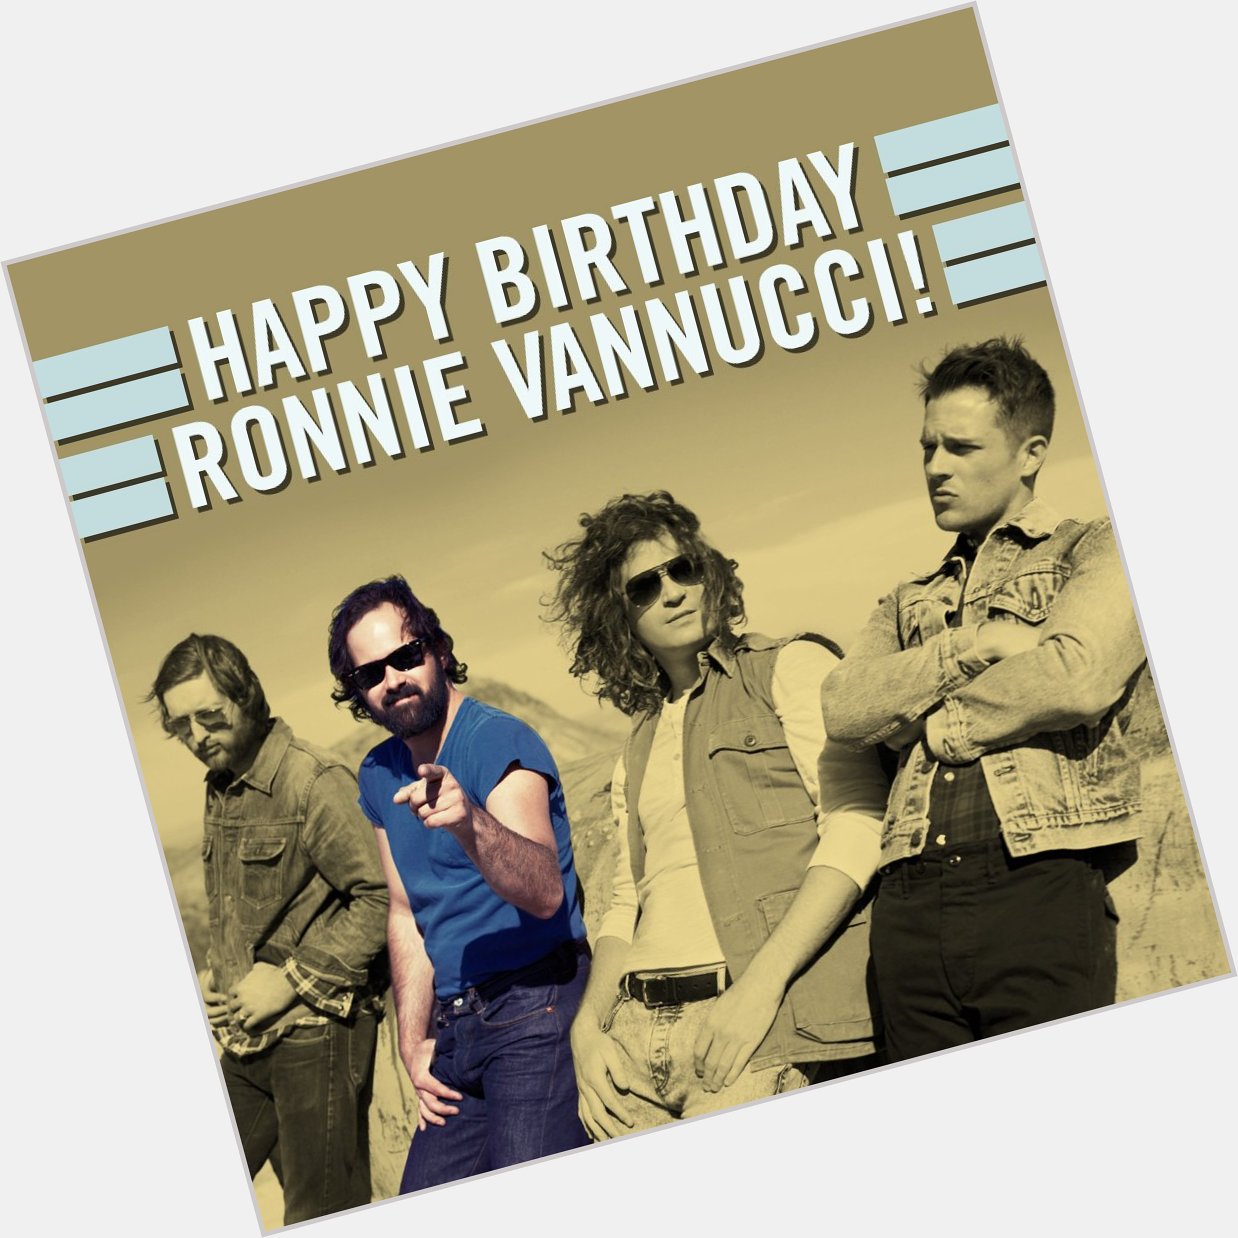 And wishing a happy birthday too for Ronnie Vannucci of 